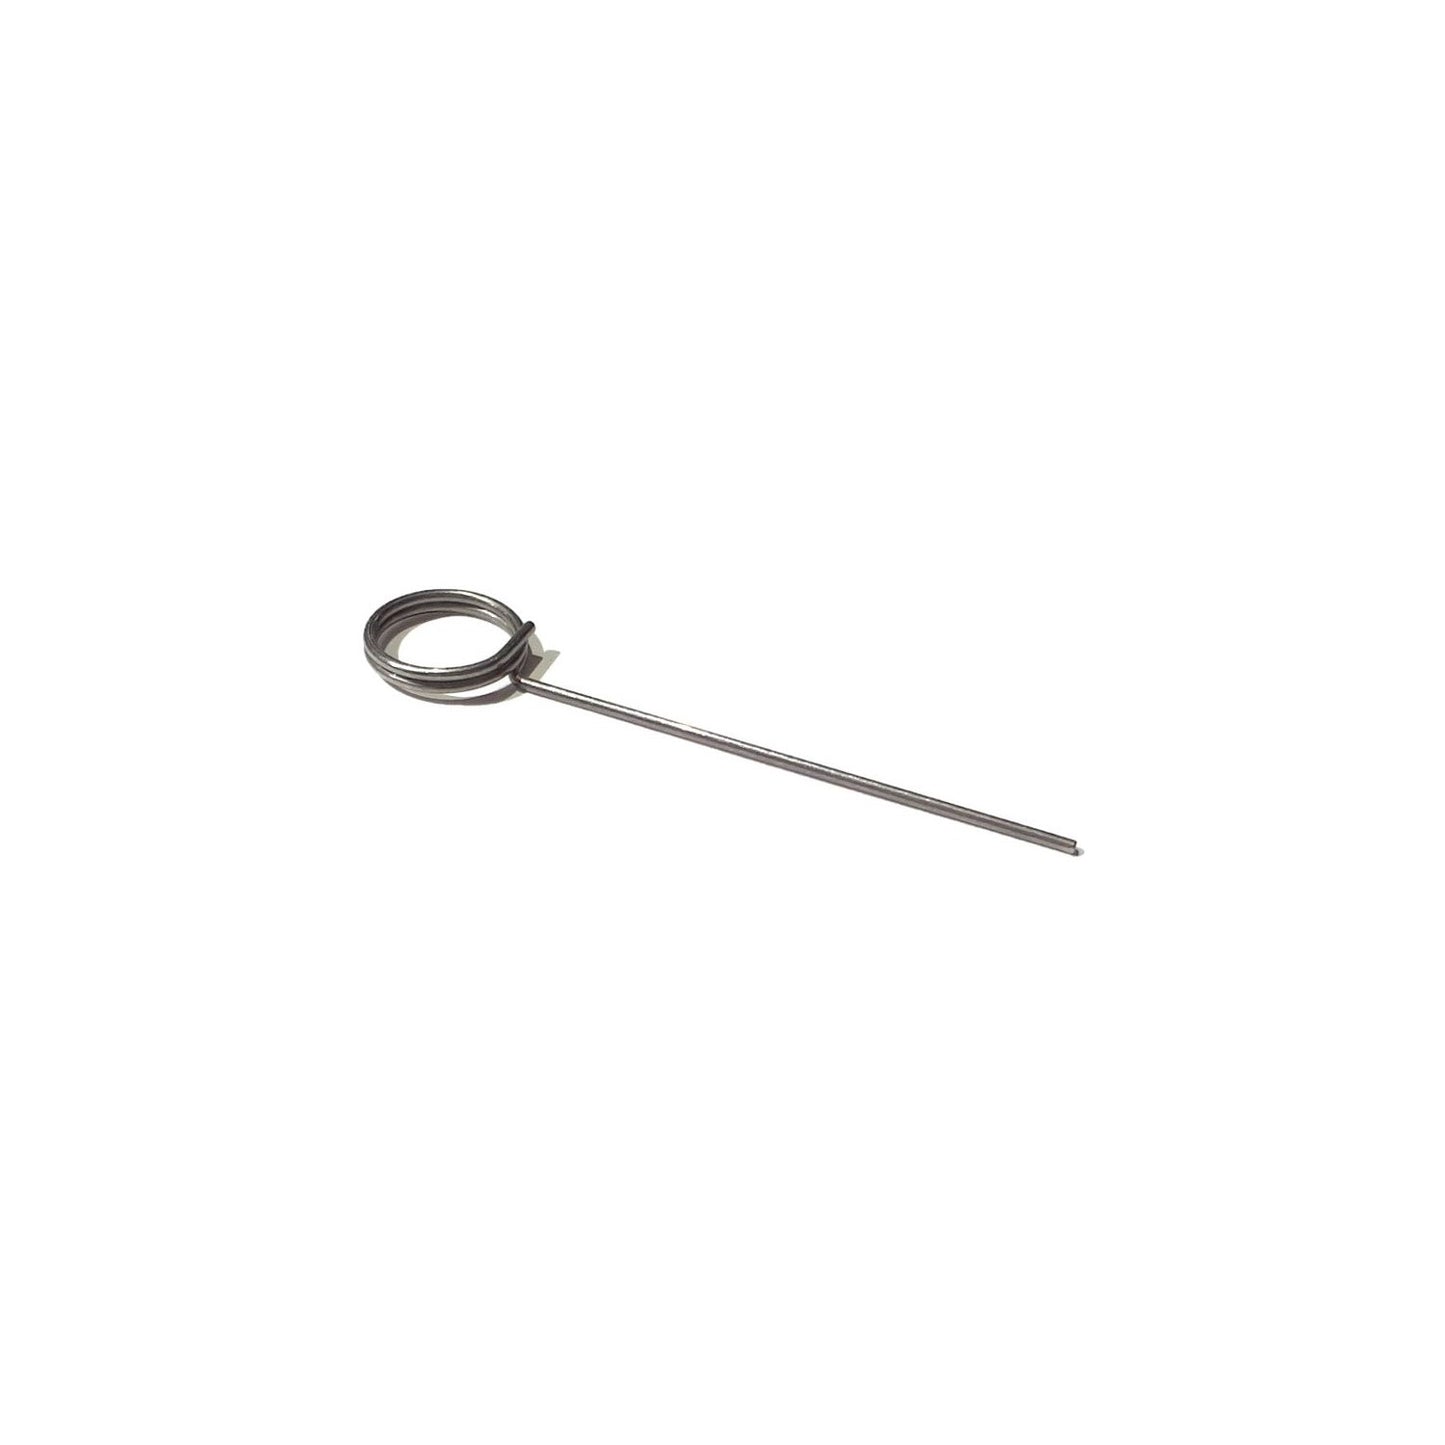 Handle Removal Pin